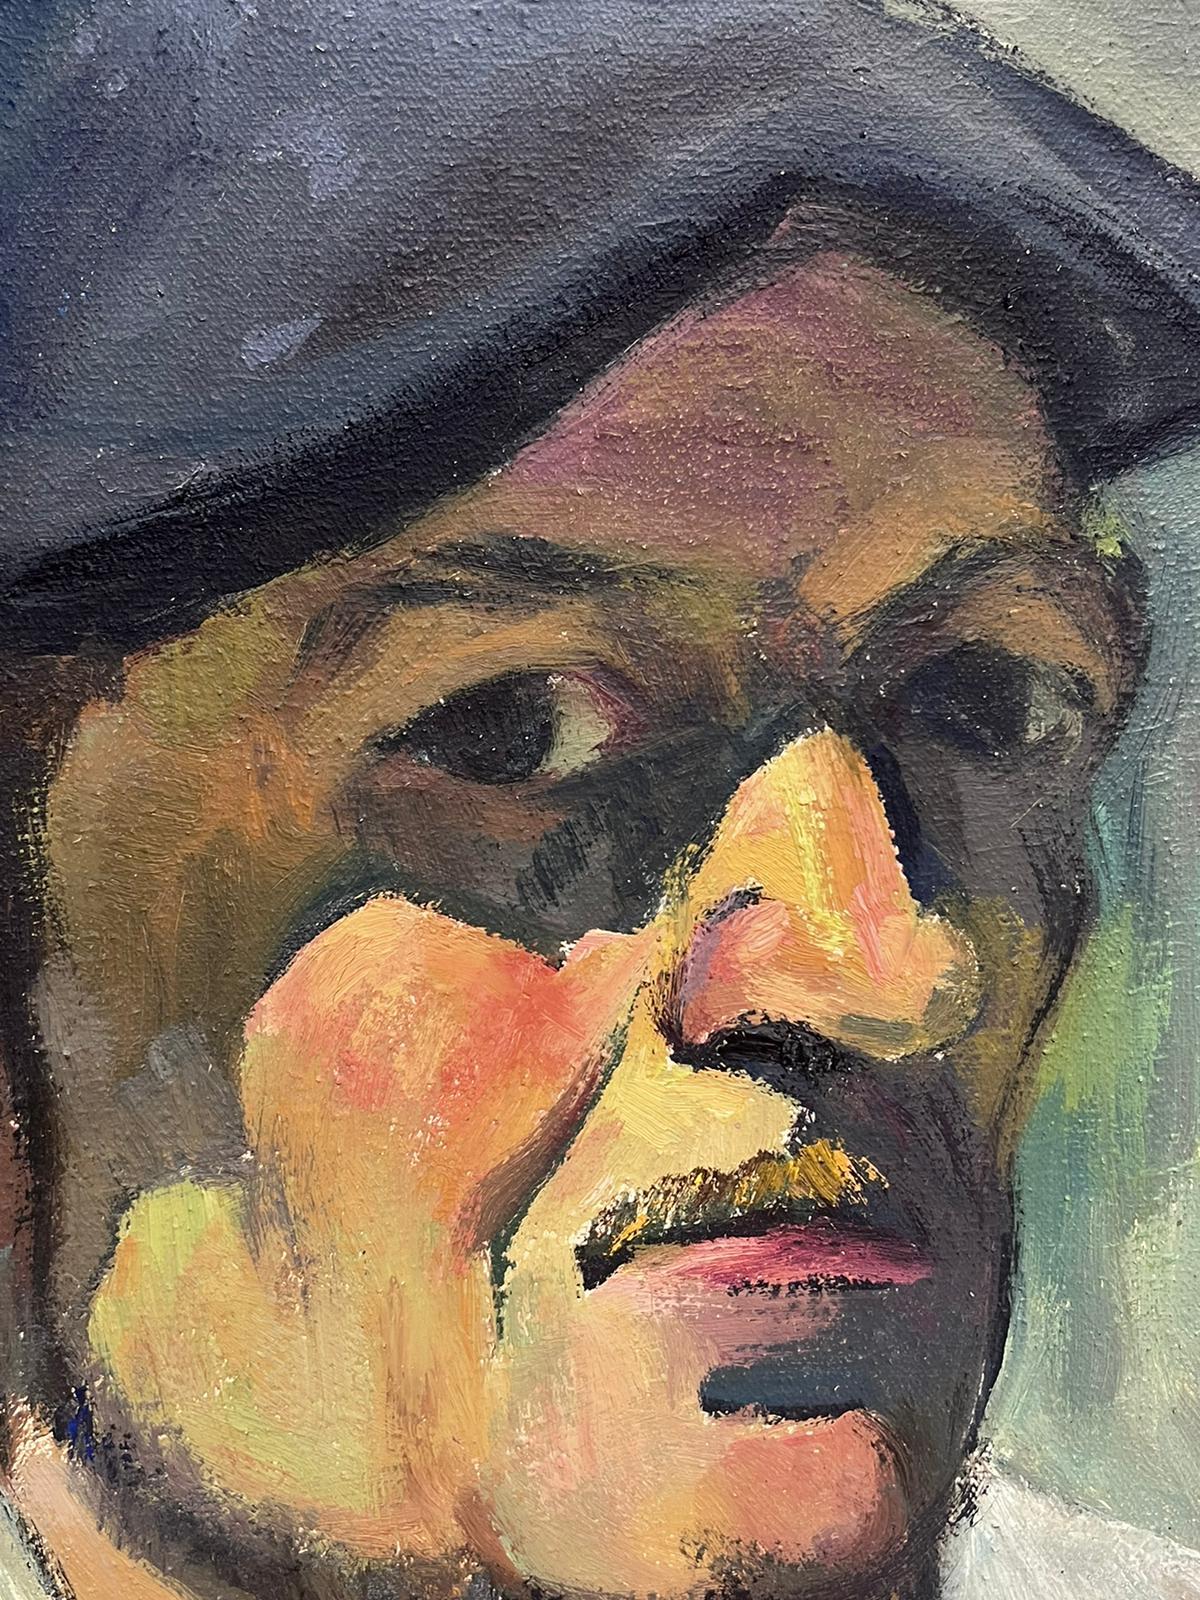 Portrait of a French man in beret/ cap
French artist, circa 1930's
oil on canvas, unframed
canvas: 16 x 13 inches
provenance: private collection, France
condition: very good and sound condition